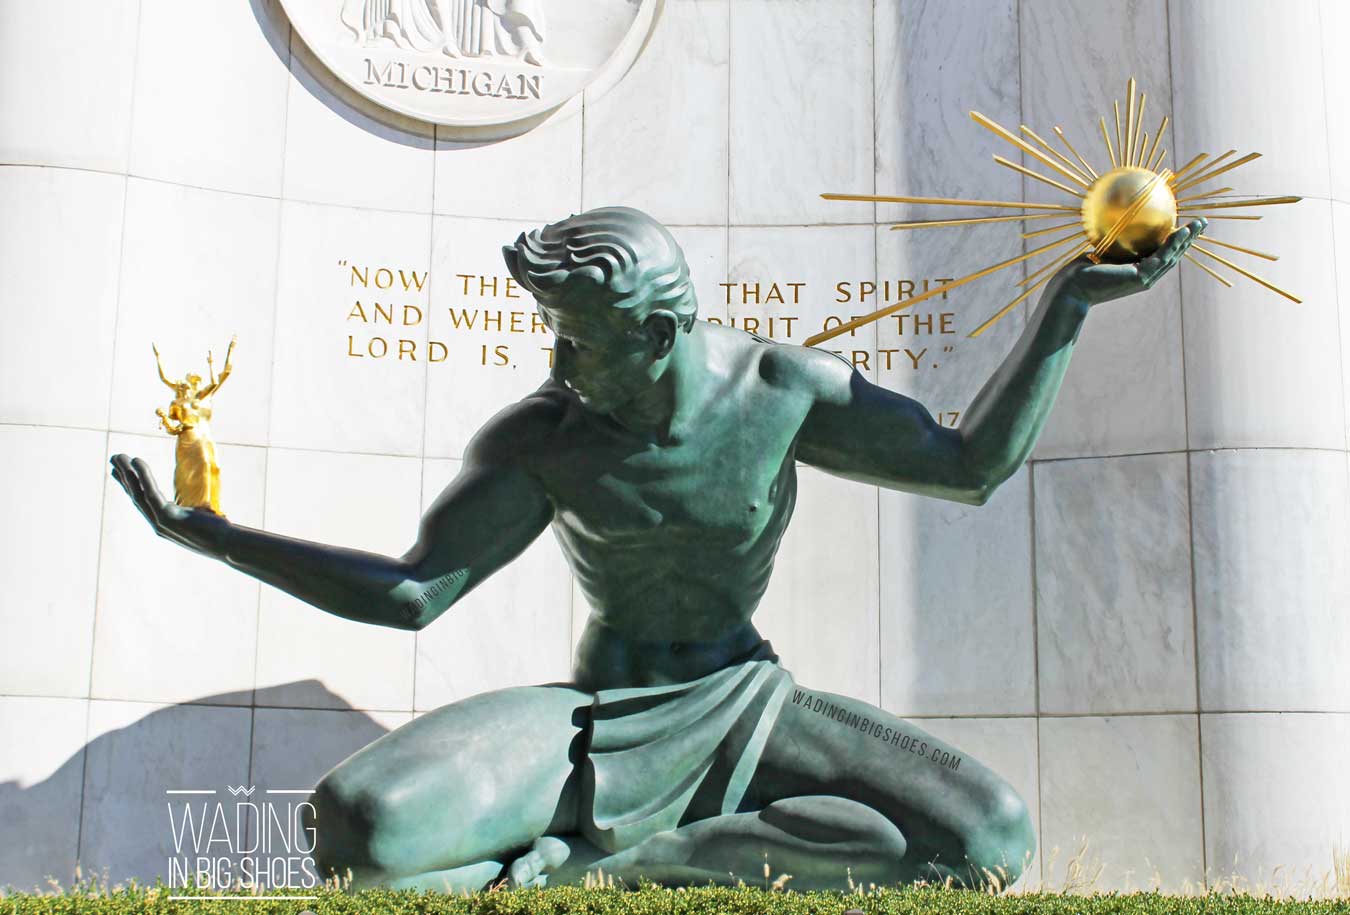 Things To Do In Detroit: Visit The Spirit Of Detroit Statue // (via Wading in Big Shoes) // Don't miss The Spirit of Detroit, located on Woodward Avenue in downtown Detroit. Commissioned in 1955, this bronze and marble statue is in front of the Coleman A. Young Center and makes a great backdrop for Detroit photos.